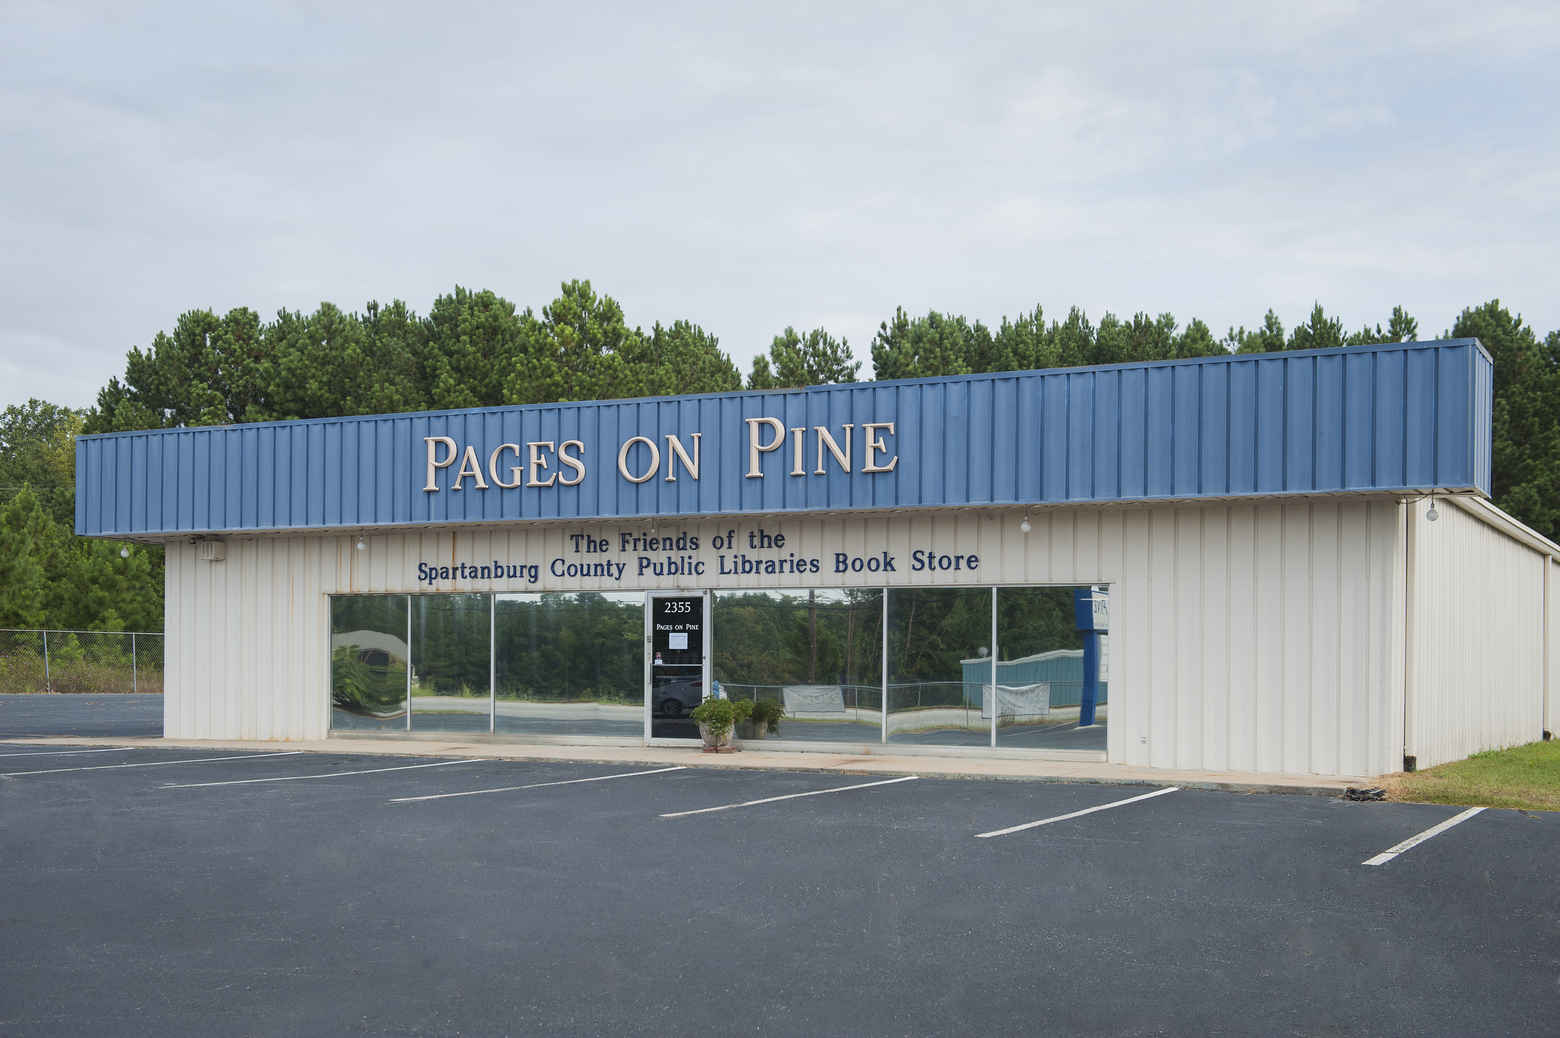 Pages on Pine book store